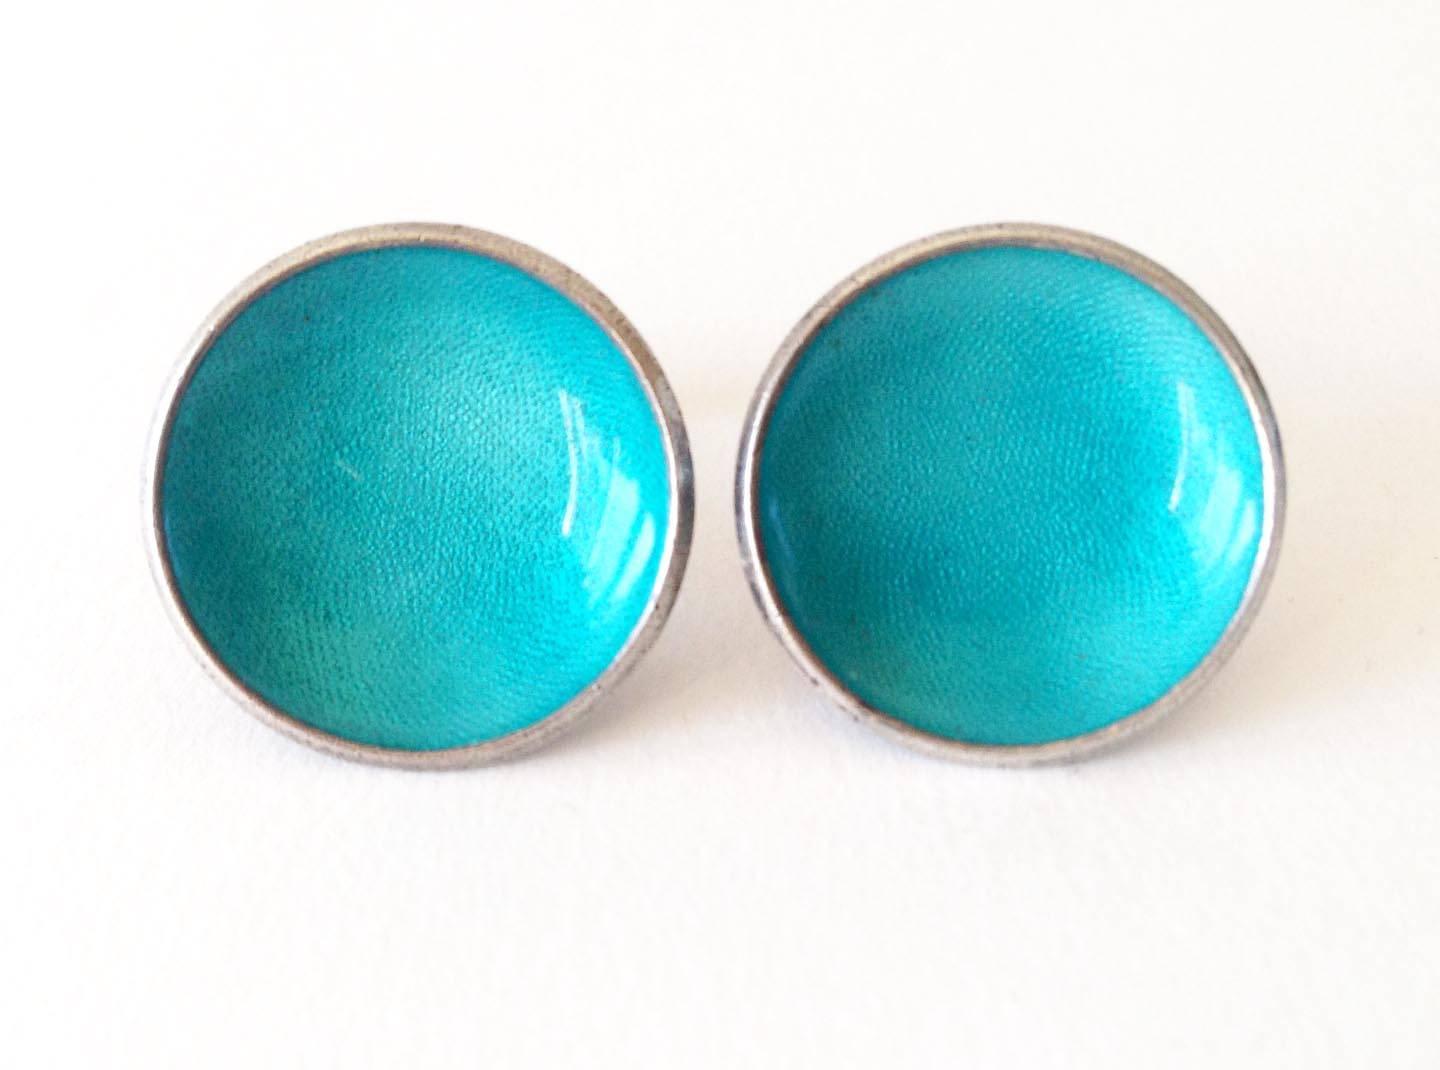 Sterling silver with turquoise guilloche enamel cufflinks created by Einar Modahl, of Norway.  Cufflinks measure 1